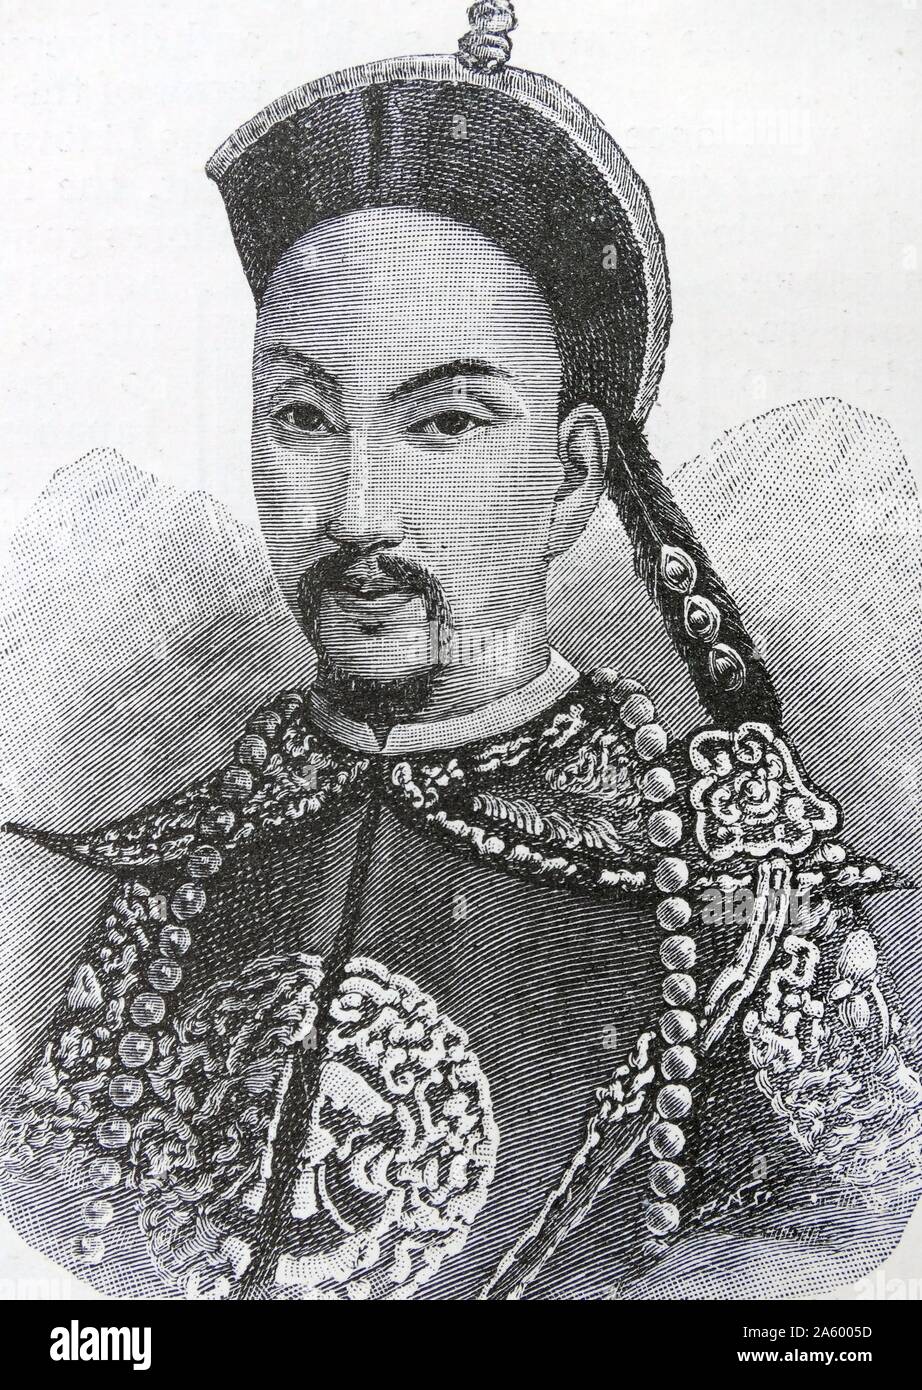 Portrait of Guangxu Emperor (1871-1908) eleventh emperor of the Qing dynasty, and the ninth Qing emperor to rule over China. Stock Photo